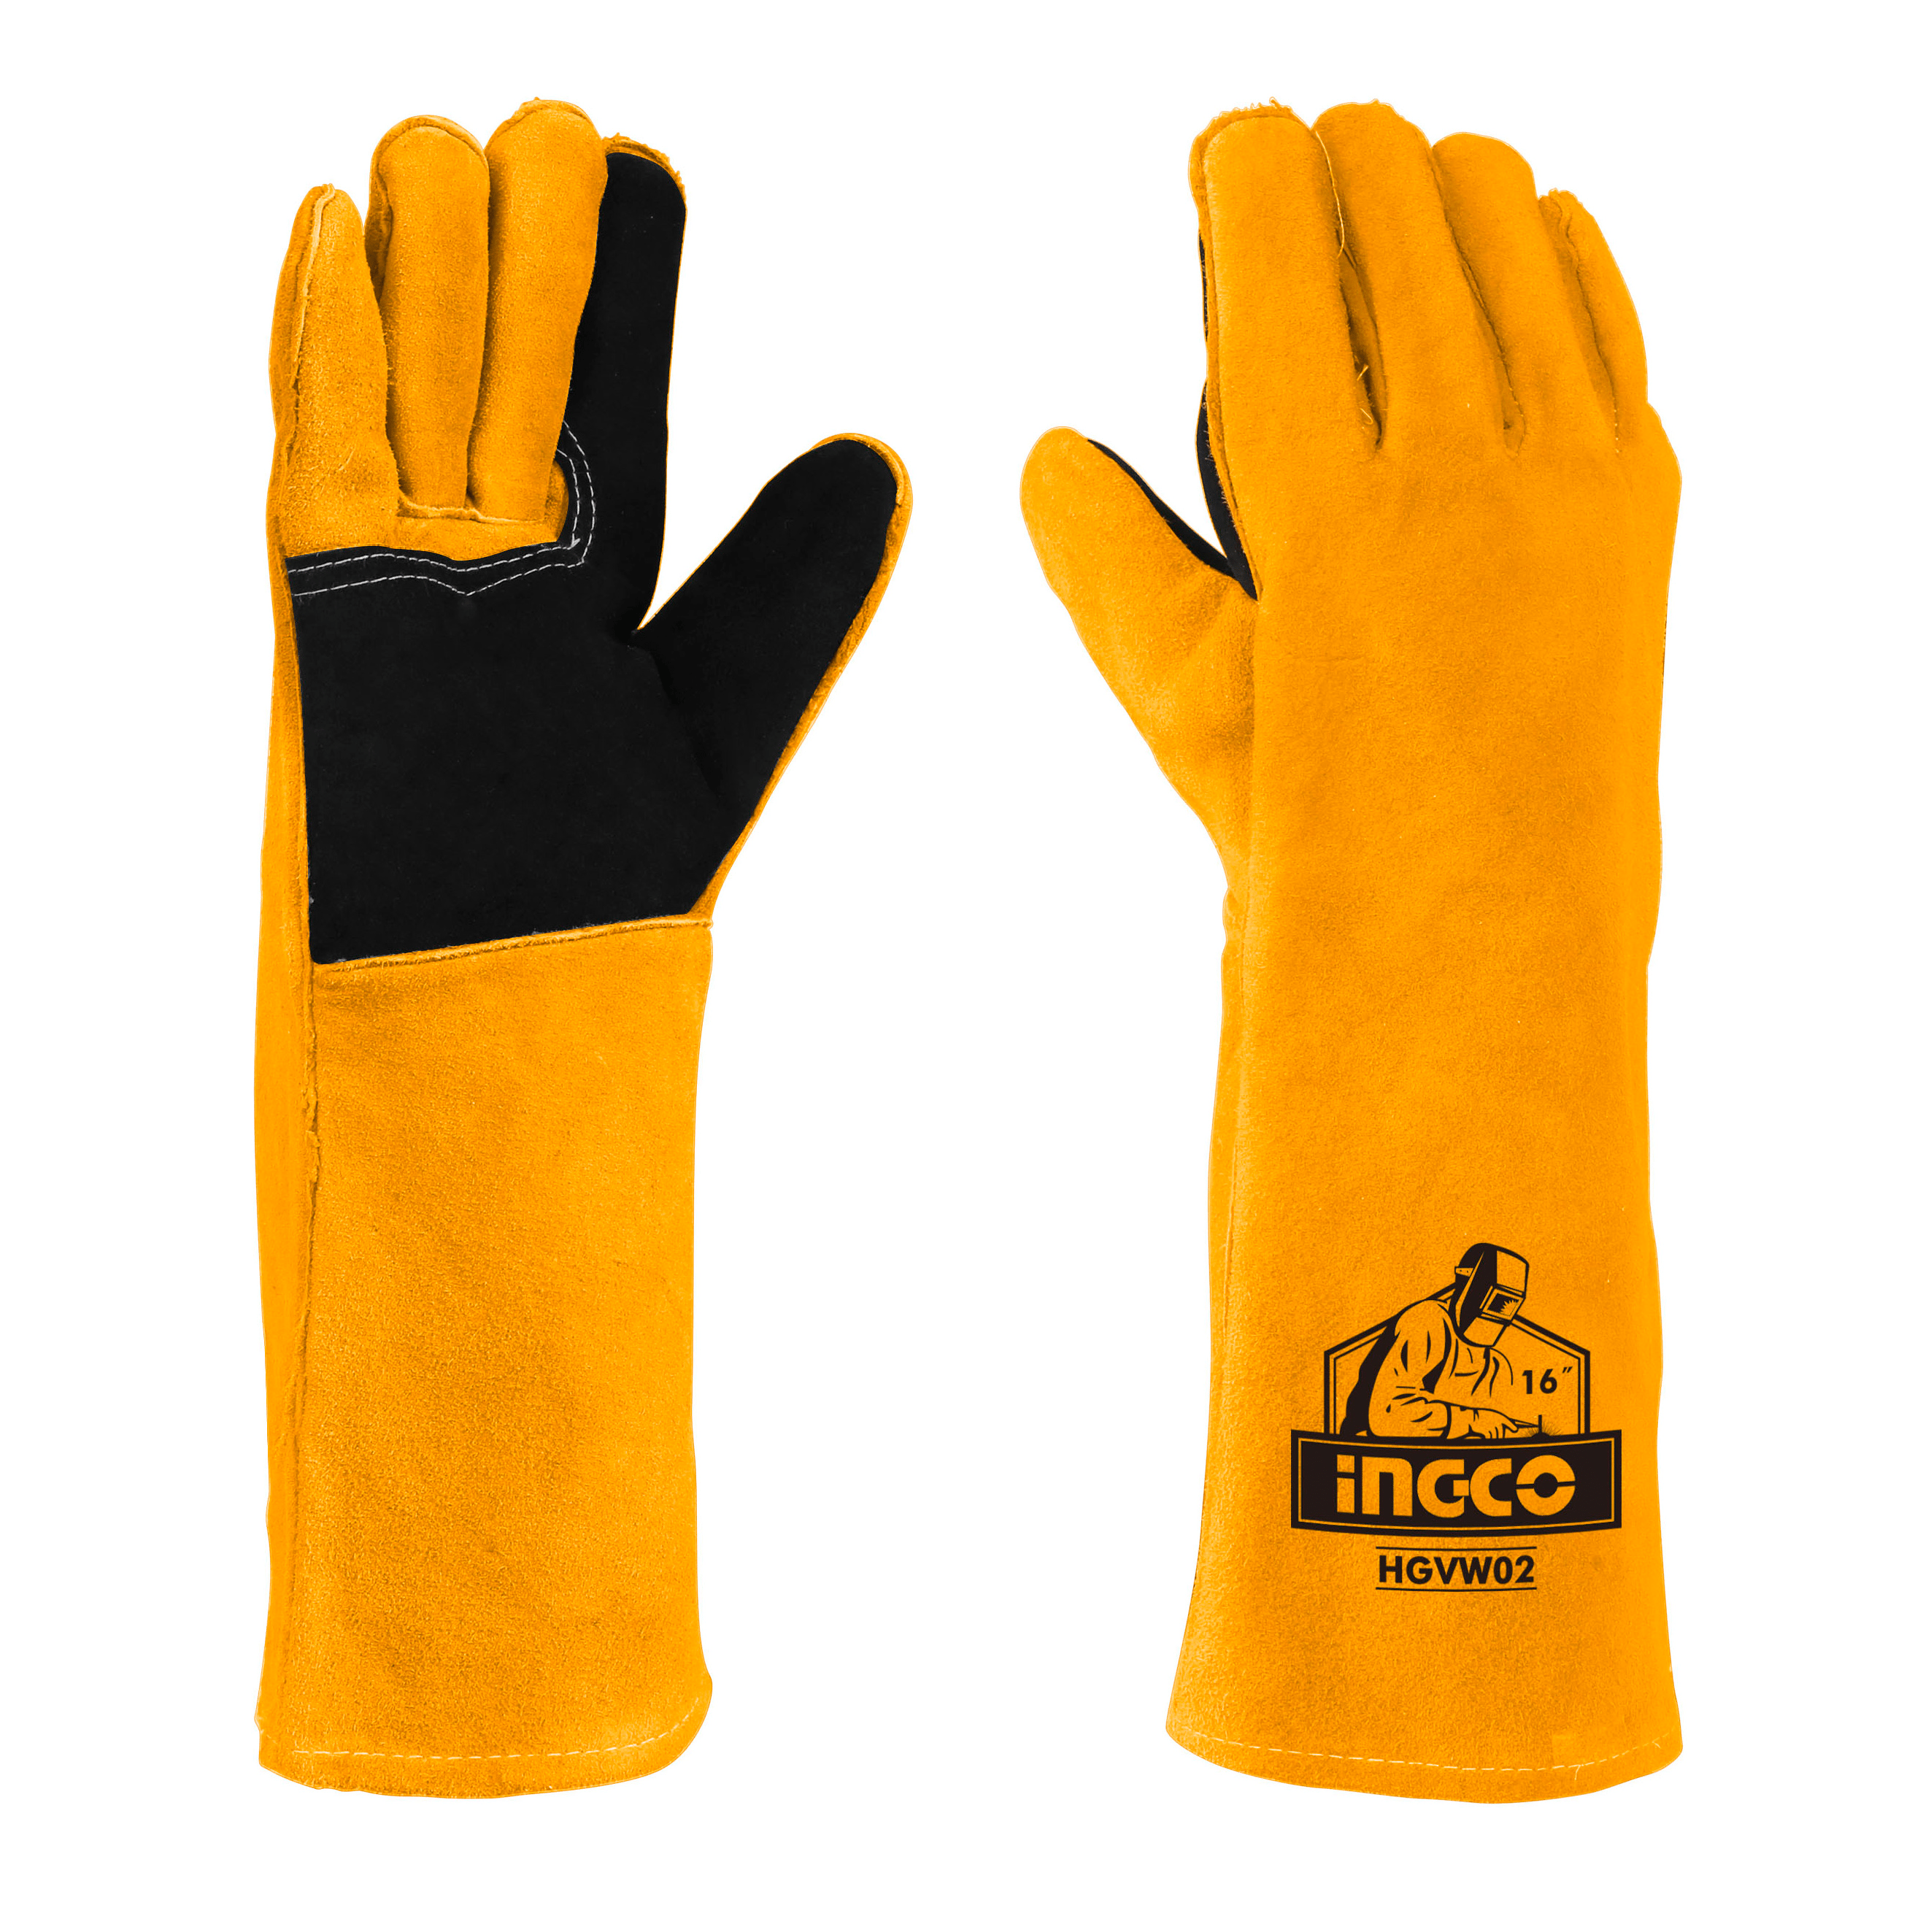 Ingco Welding Leather Gloves - HGVW02 | Supply Master | Accra, Ghana Work Gloves Buy Tools hardware Building materials